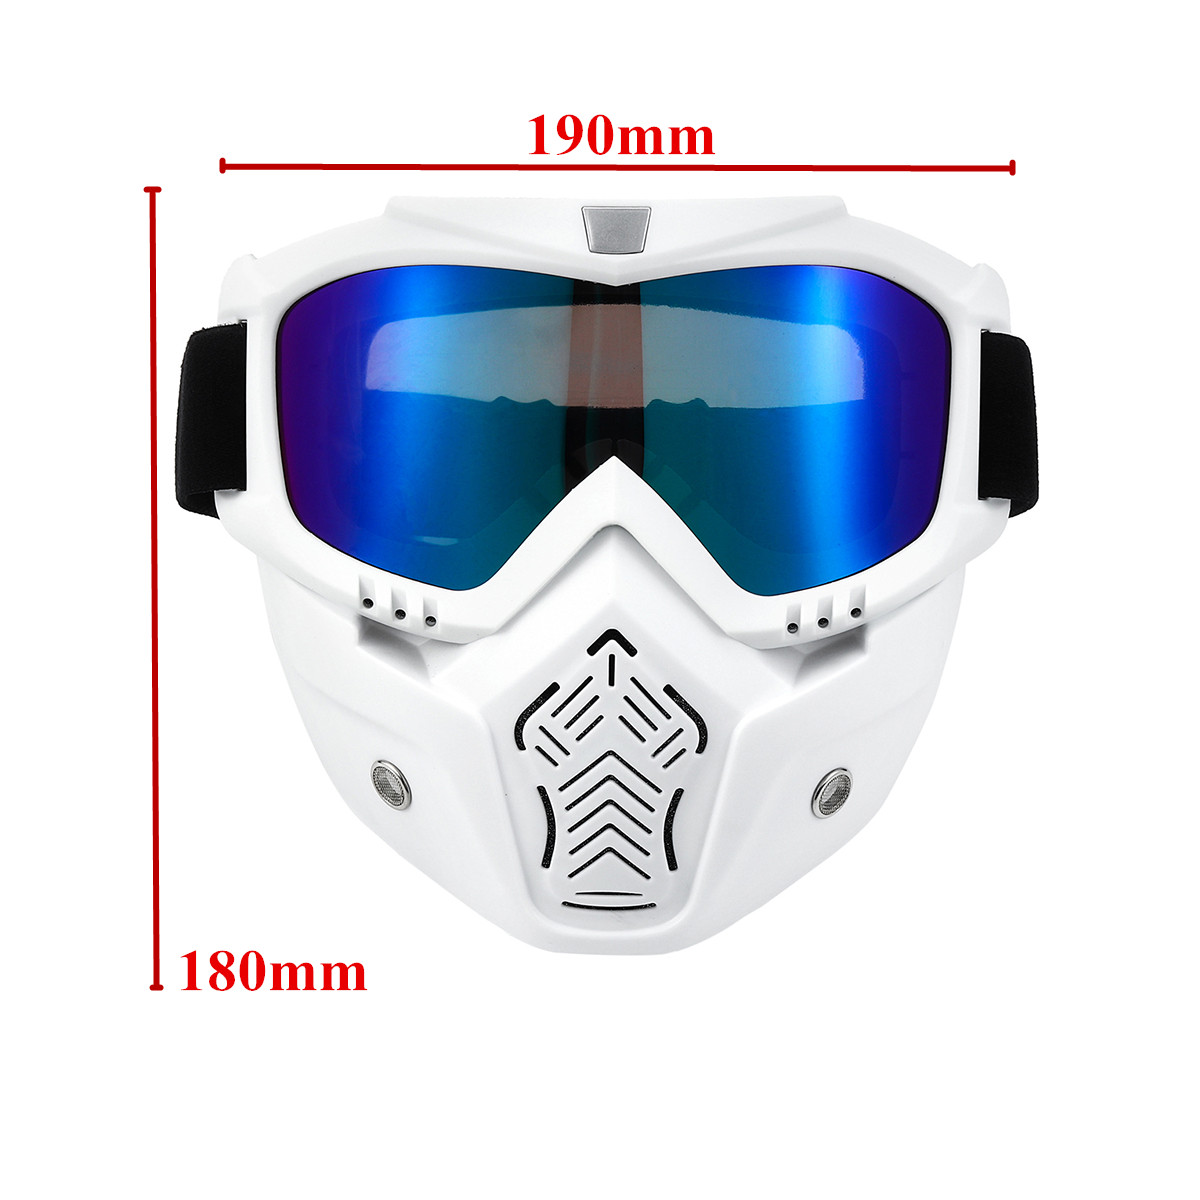 Cool Helmet Glasses Windproof Road Riding UV Motorbike Glasses with Dustproof Mask Freehawk Motorcycle Goggles Mask Detachable Safety Goggles Mask 